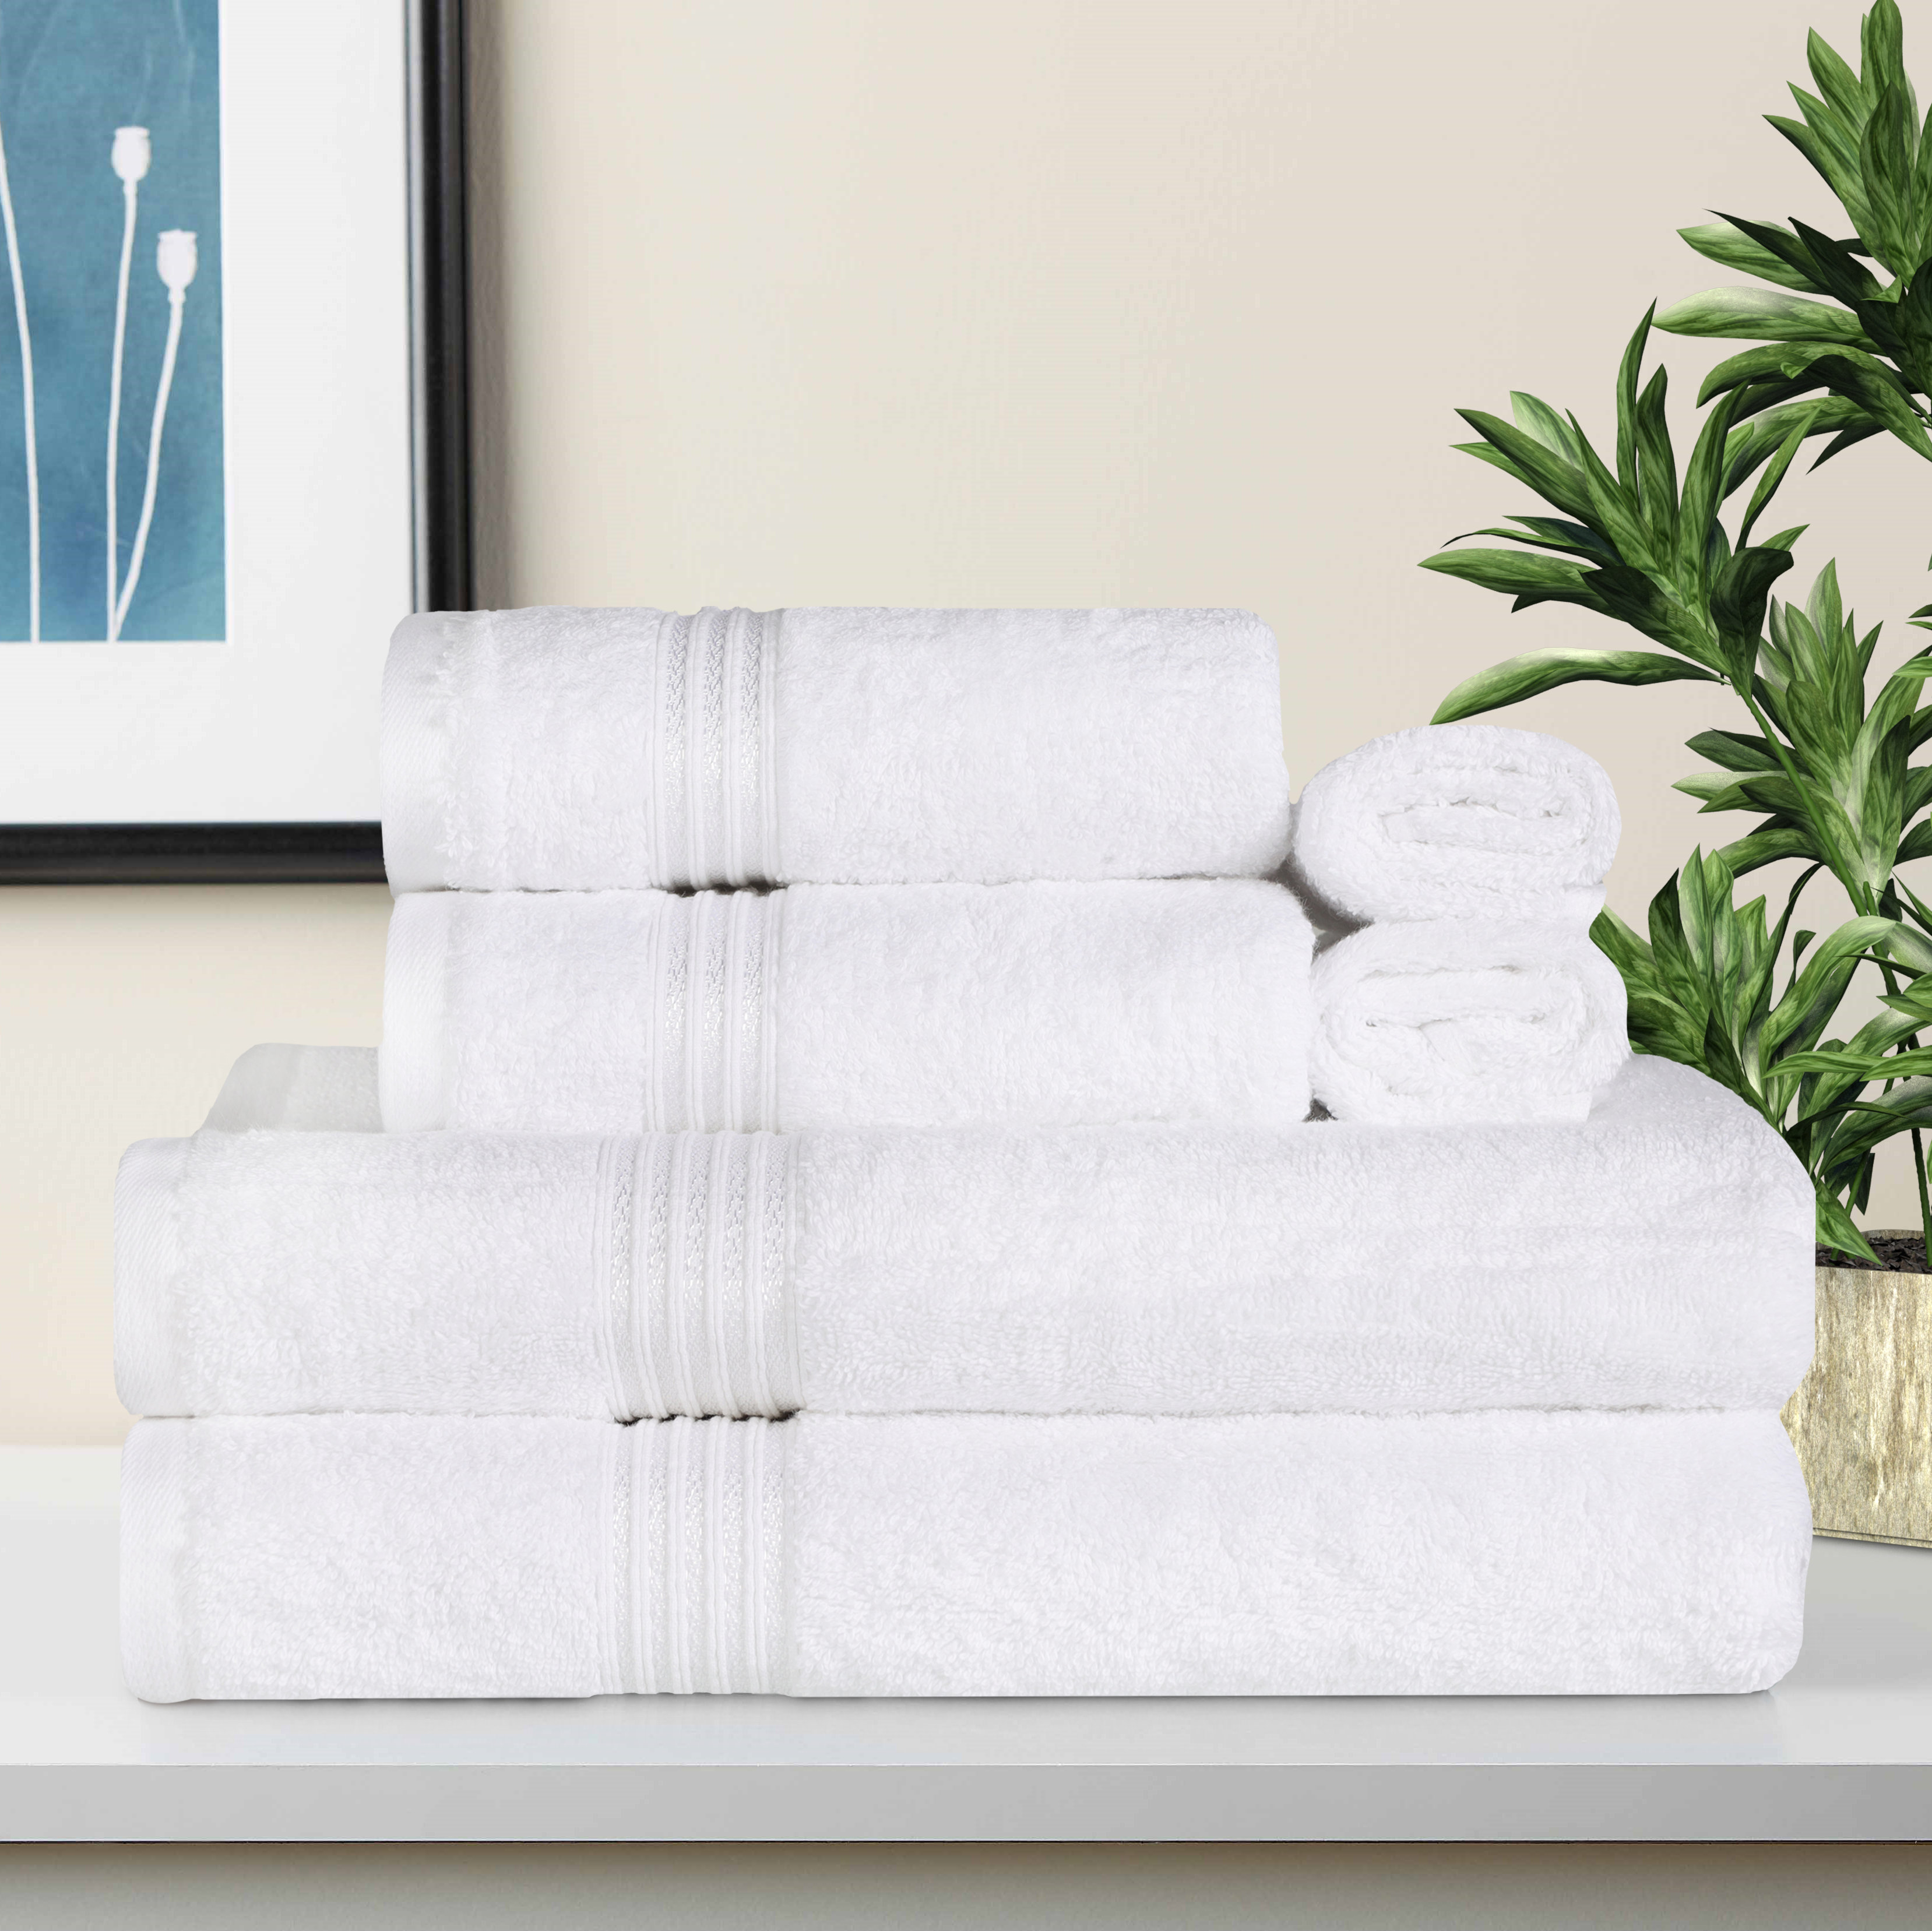 100% Combed Cotton Hotel Quality Soft Highly Absorbent & Quick Dry For Daily Use- Grey Adam Home Premium Hand Towels 600 GSM 50 x 90 CM 4 Pack 